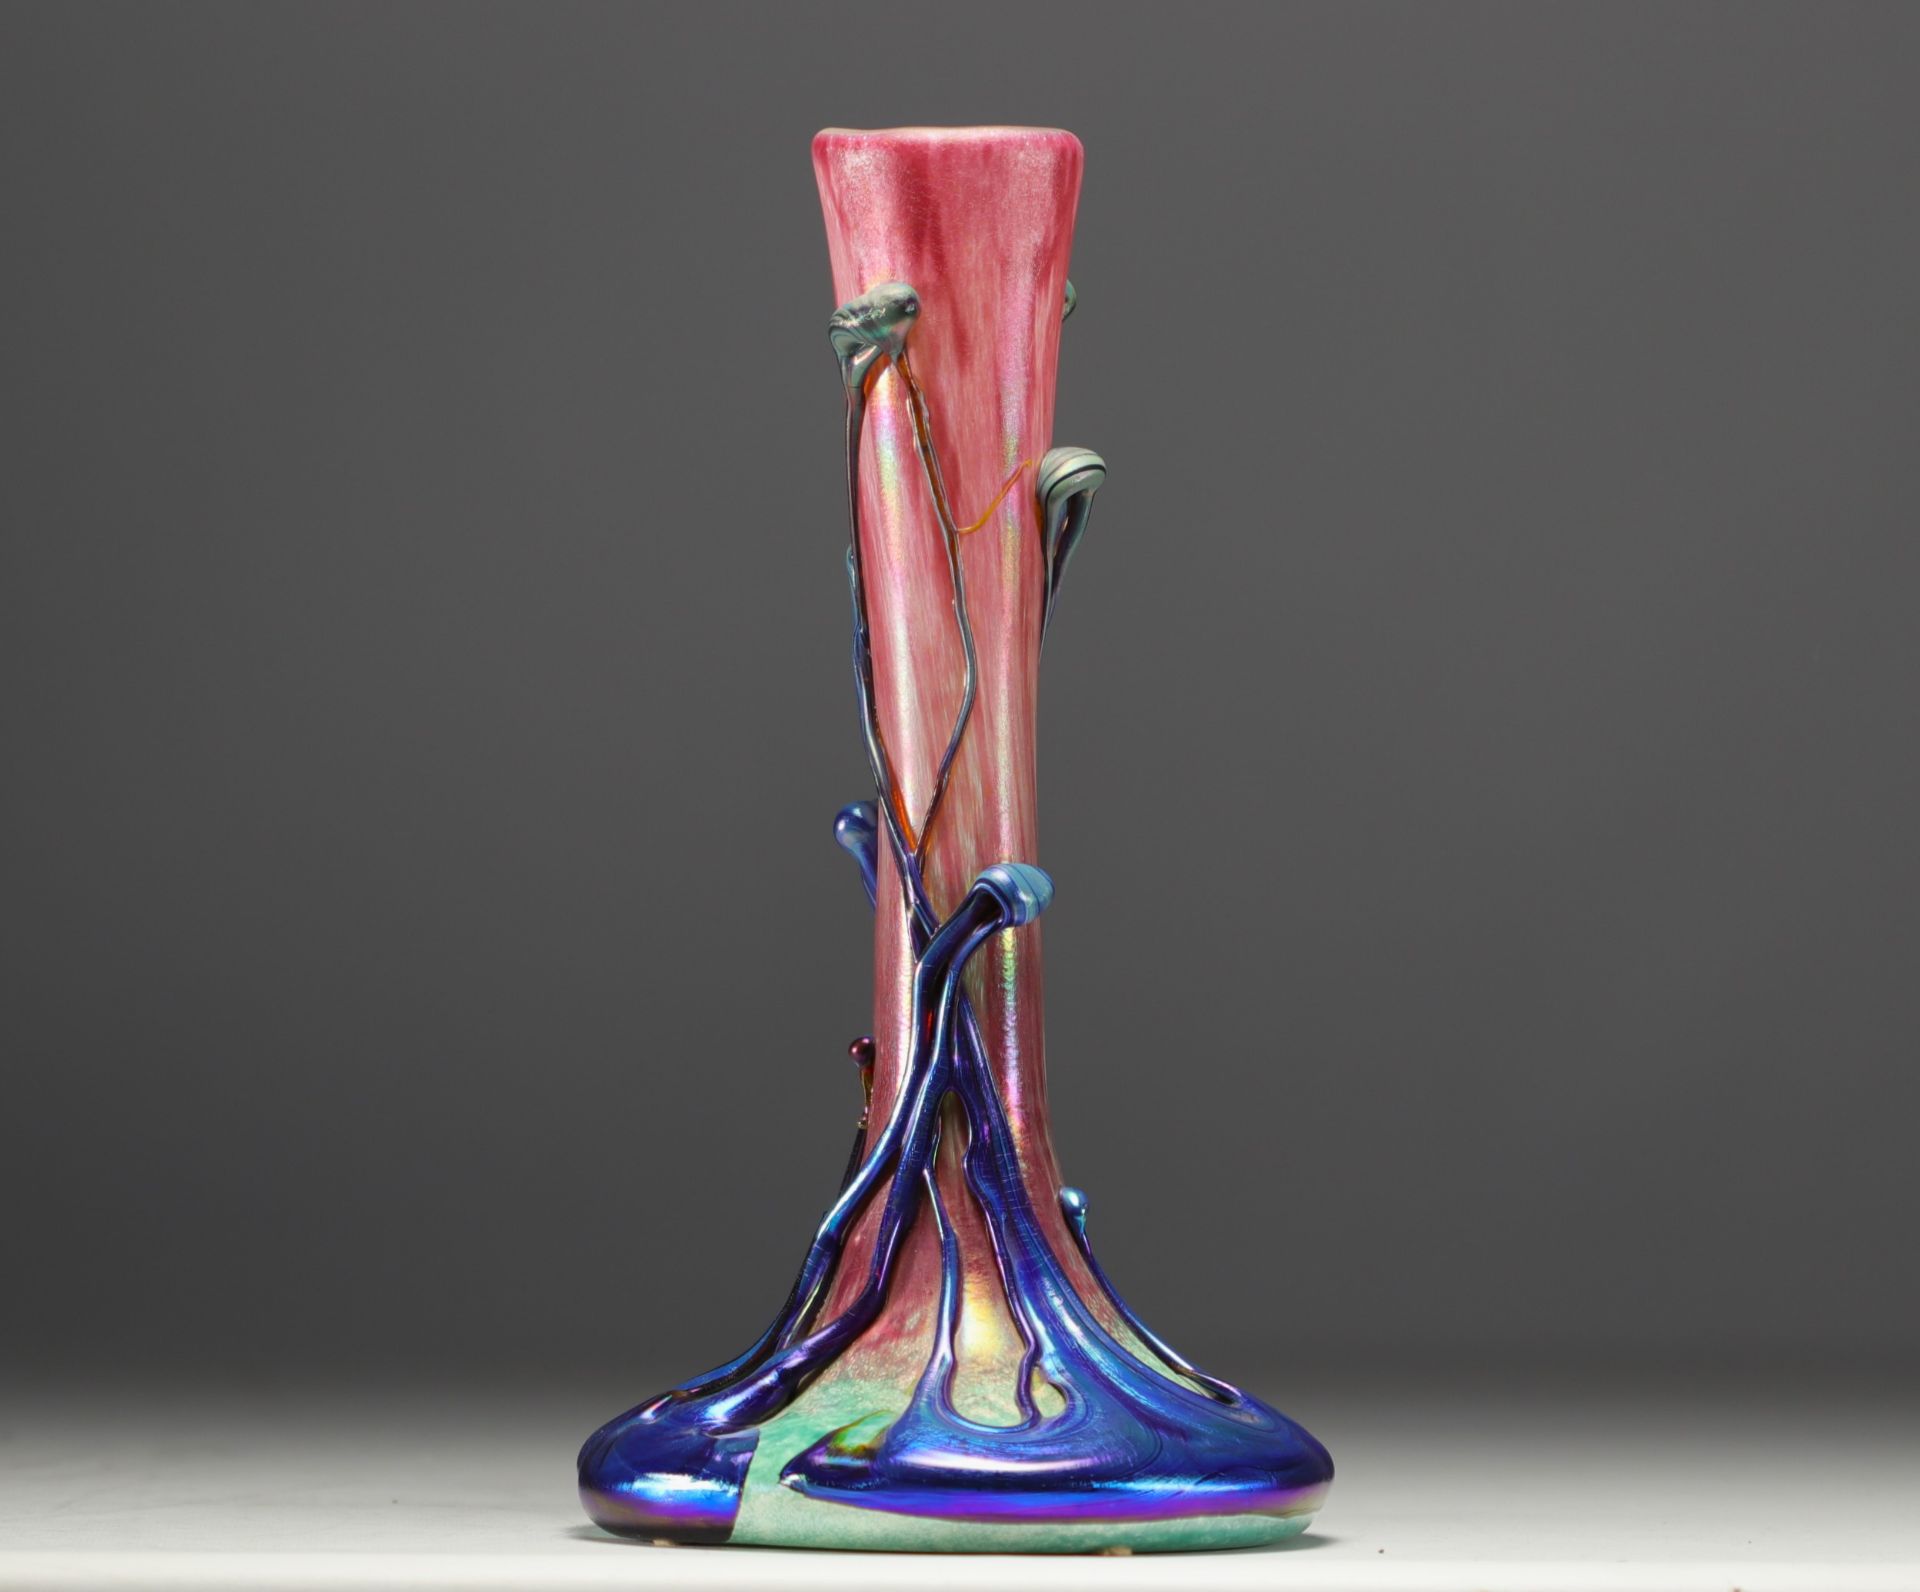 Michele LUZORO (1949 - ) Novaro workshop - Blown glass vase in shades of pink, blue and green. - Image 2 of 4